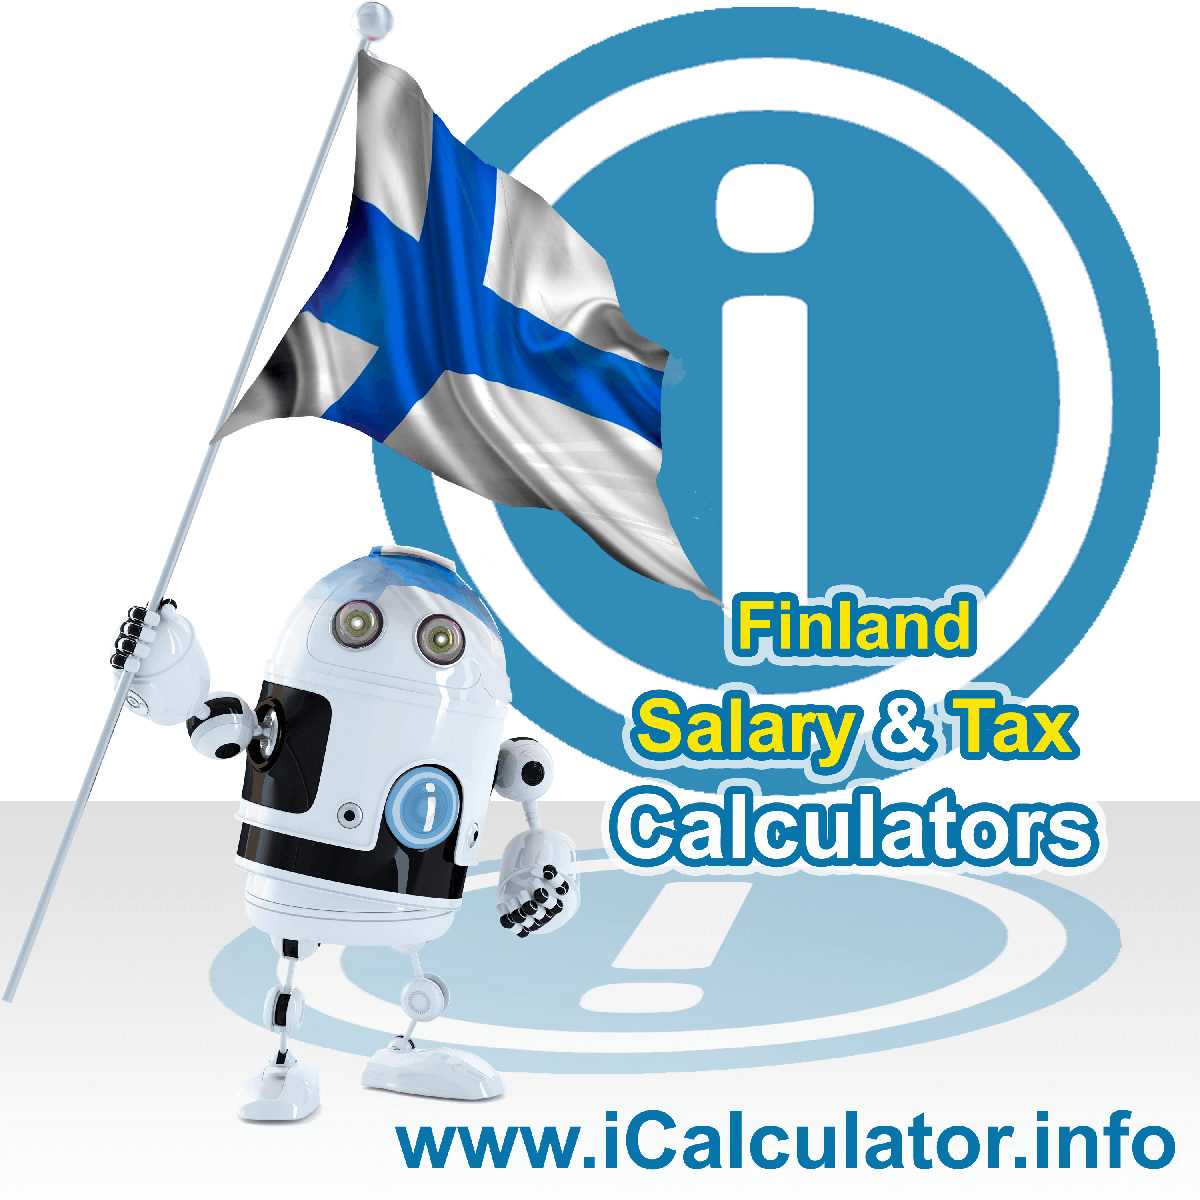 Finland Tax Calculator. This image shows the Finland flag and information relating to the tax formula for the Finland Salary Calculator